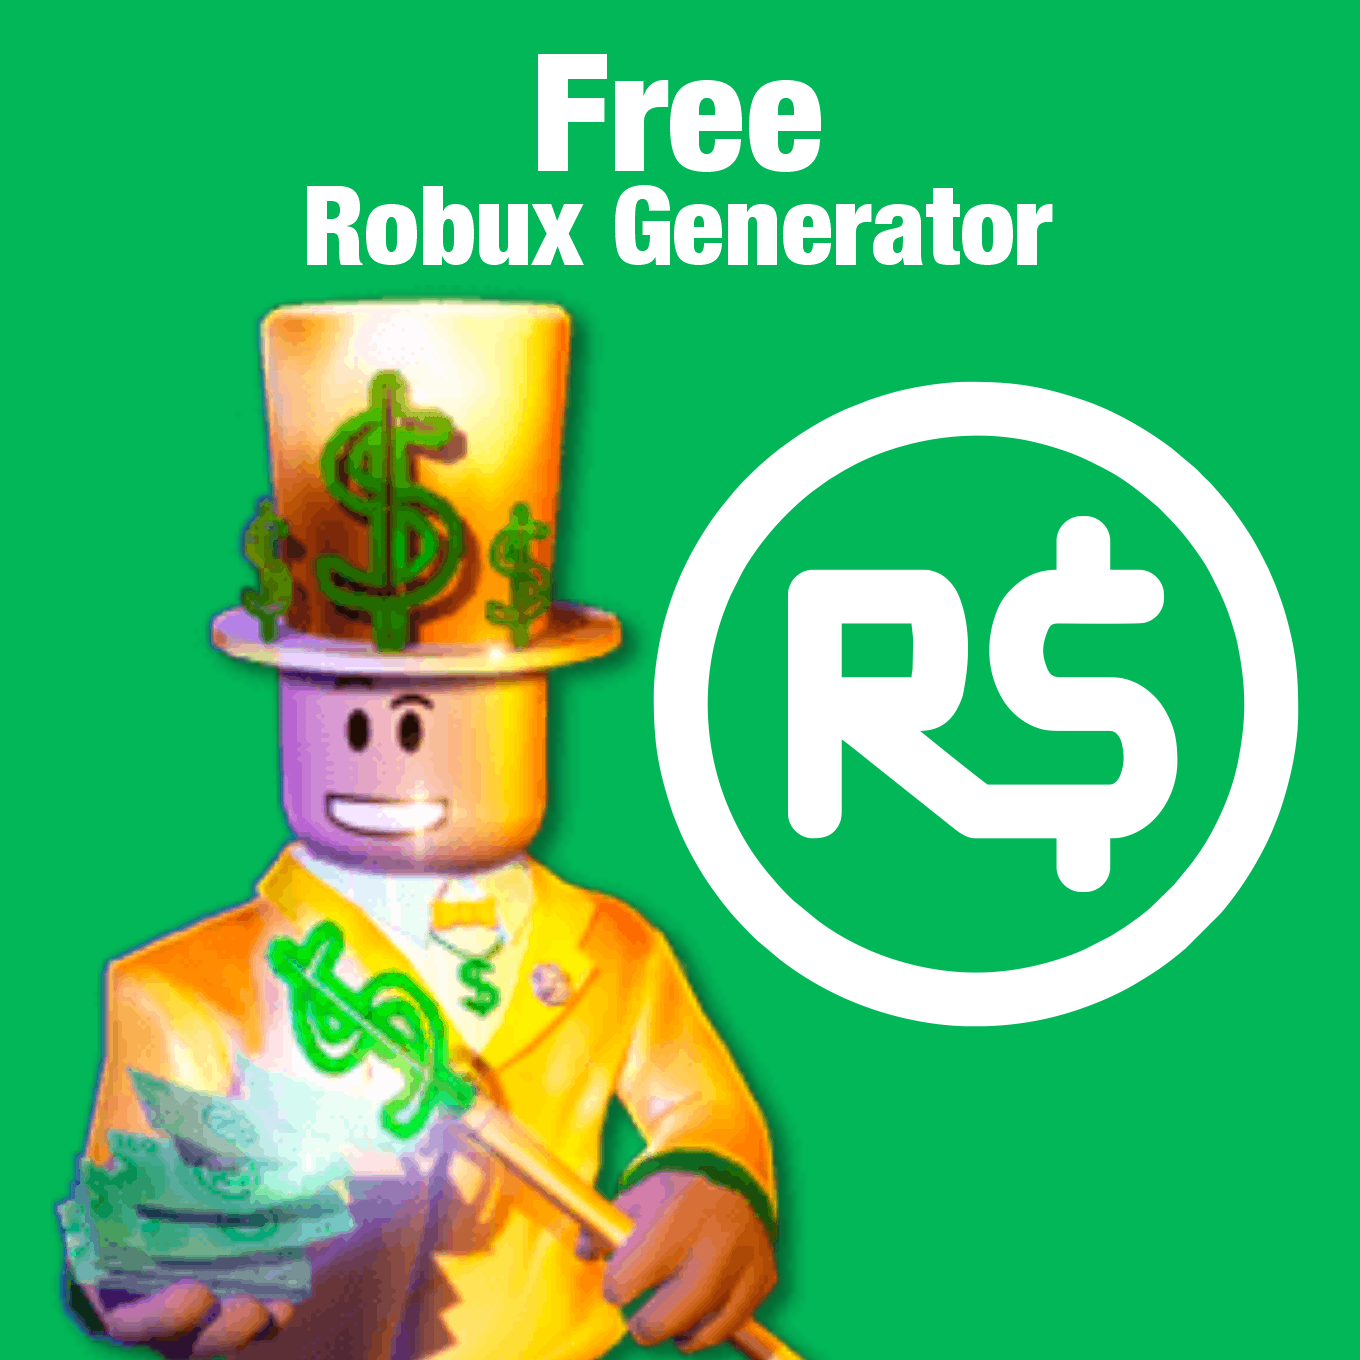 rbx boots free robux